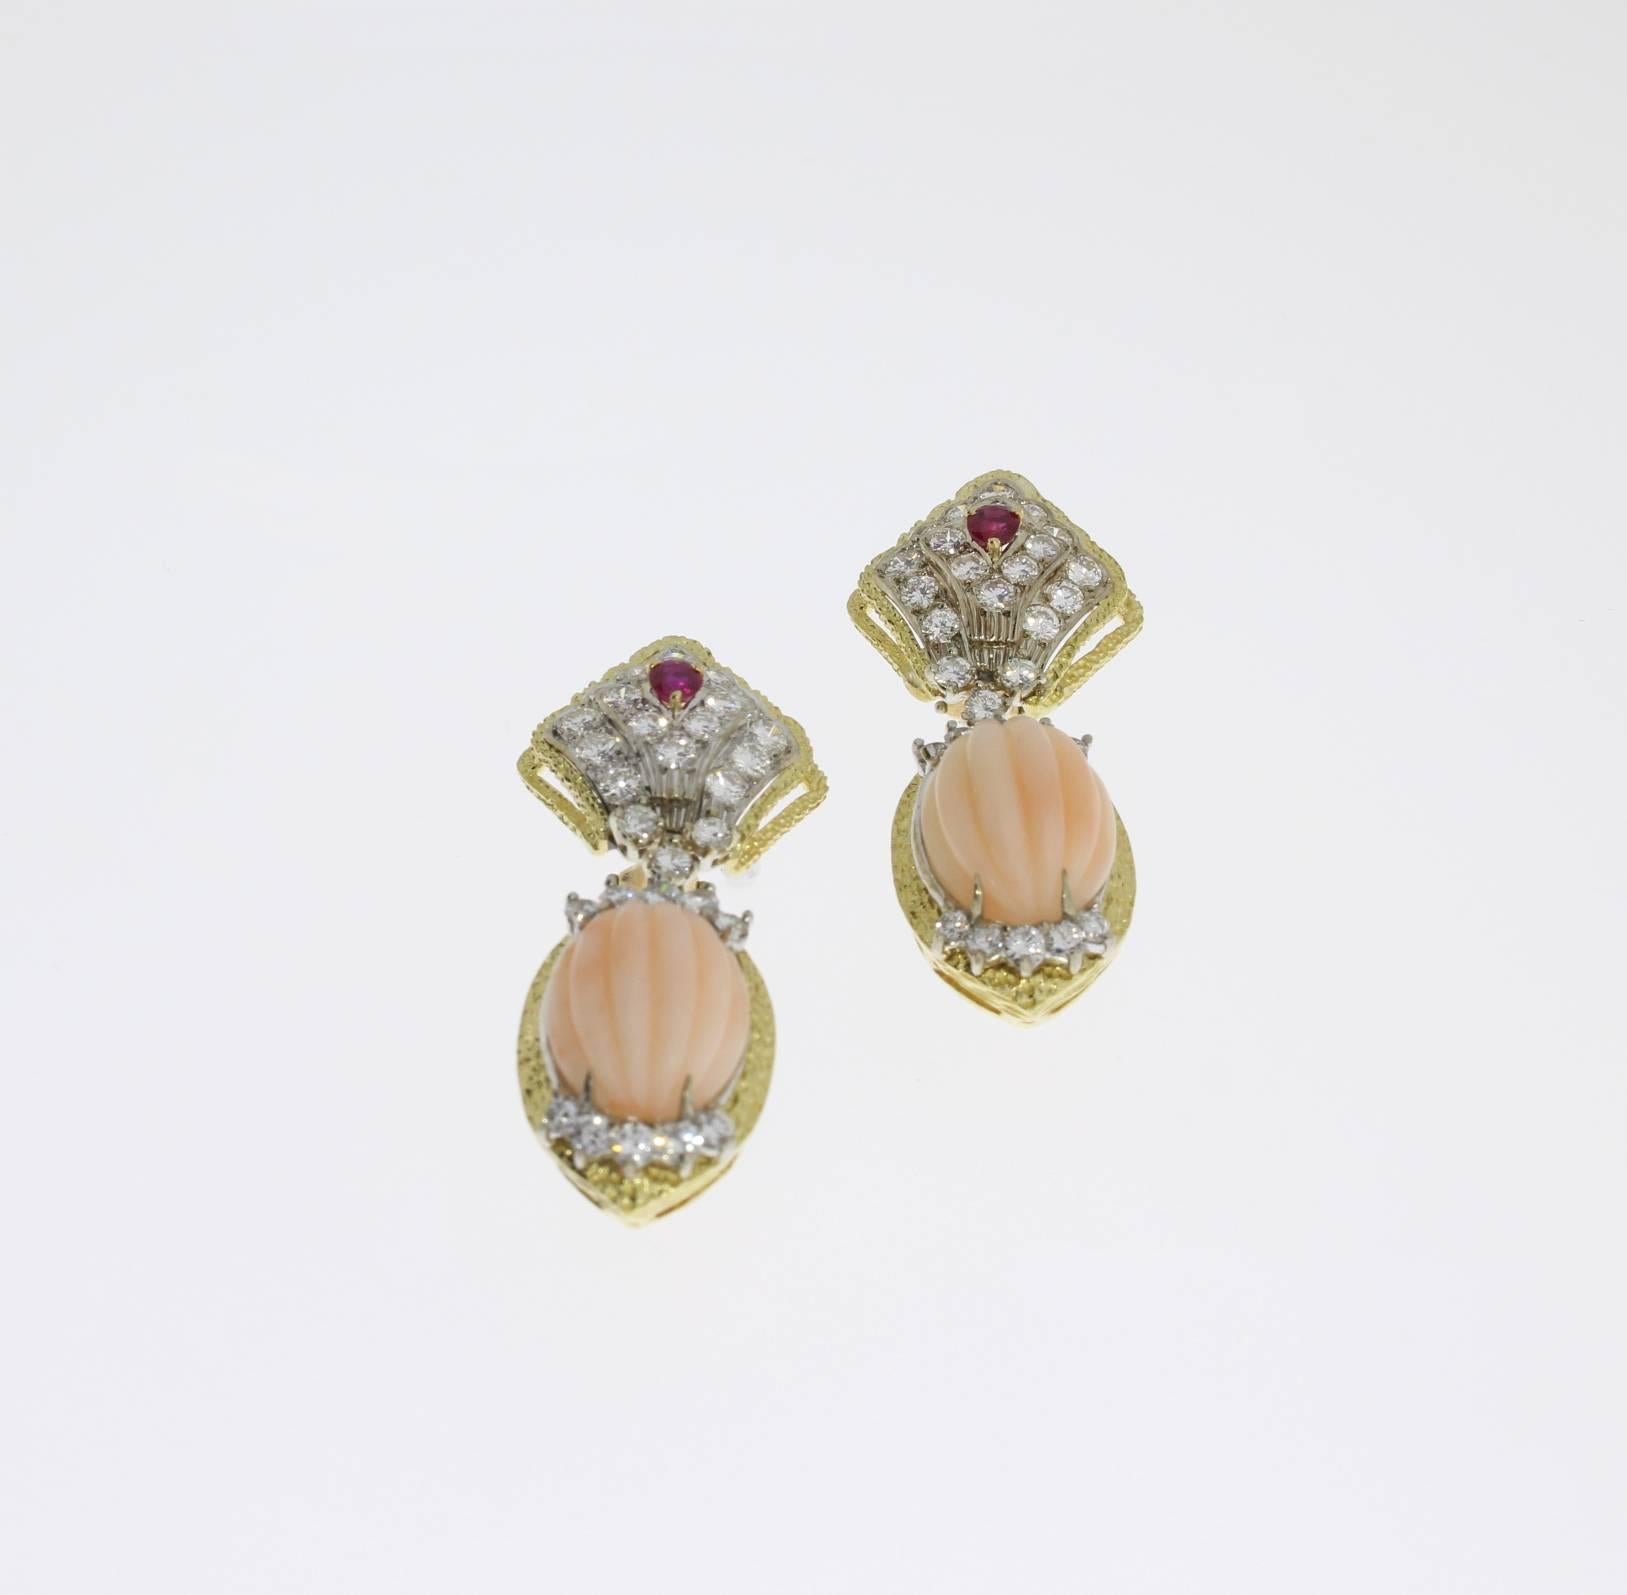 1960s-1970s. 2 cabochon-cut carved coral, 60 brilliant-cut diamonds weighing approximately 4,92 ct., 2 rubies weighing circa 0.45 ct. Mounted in 18 K yellow gold. Total weight: 23,73 g. Length: 1.97 in ( 5 cm )